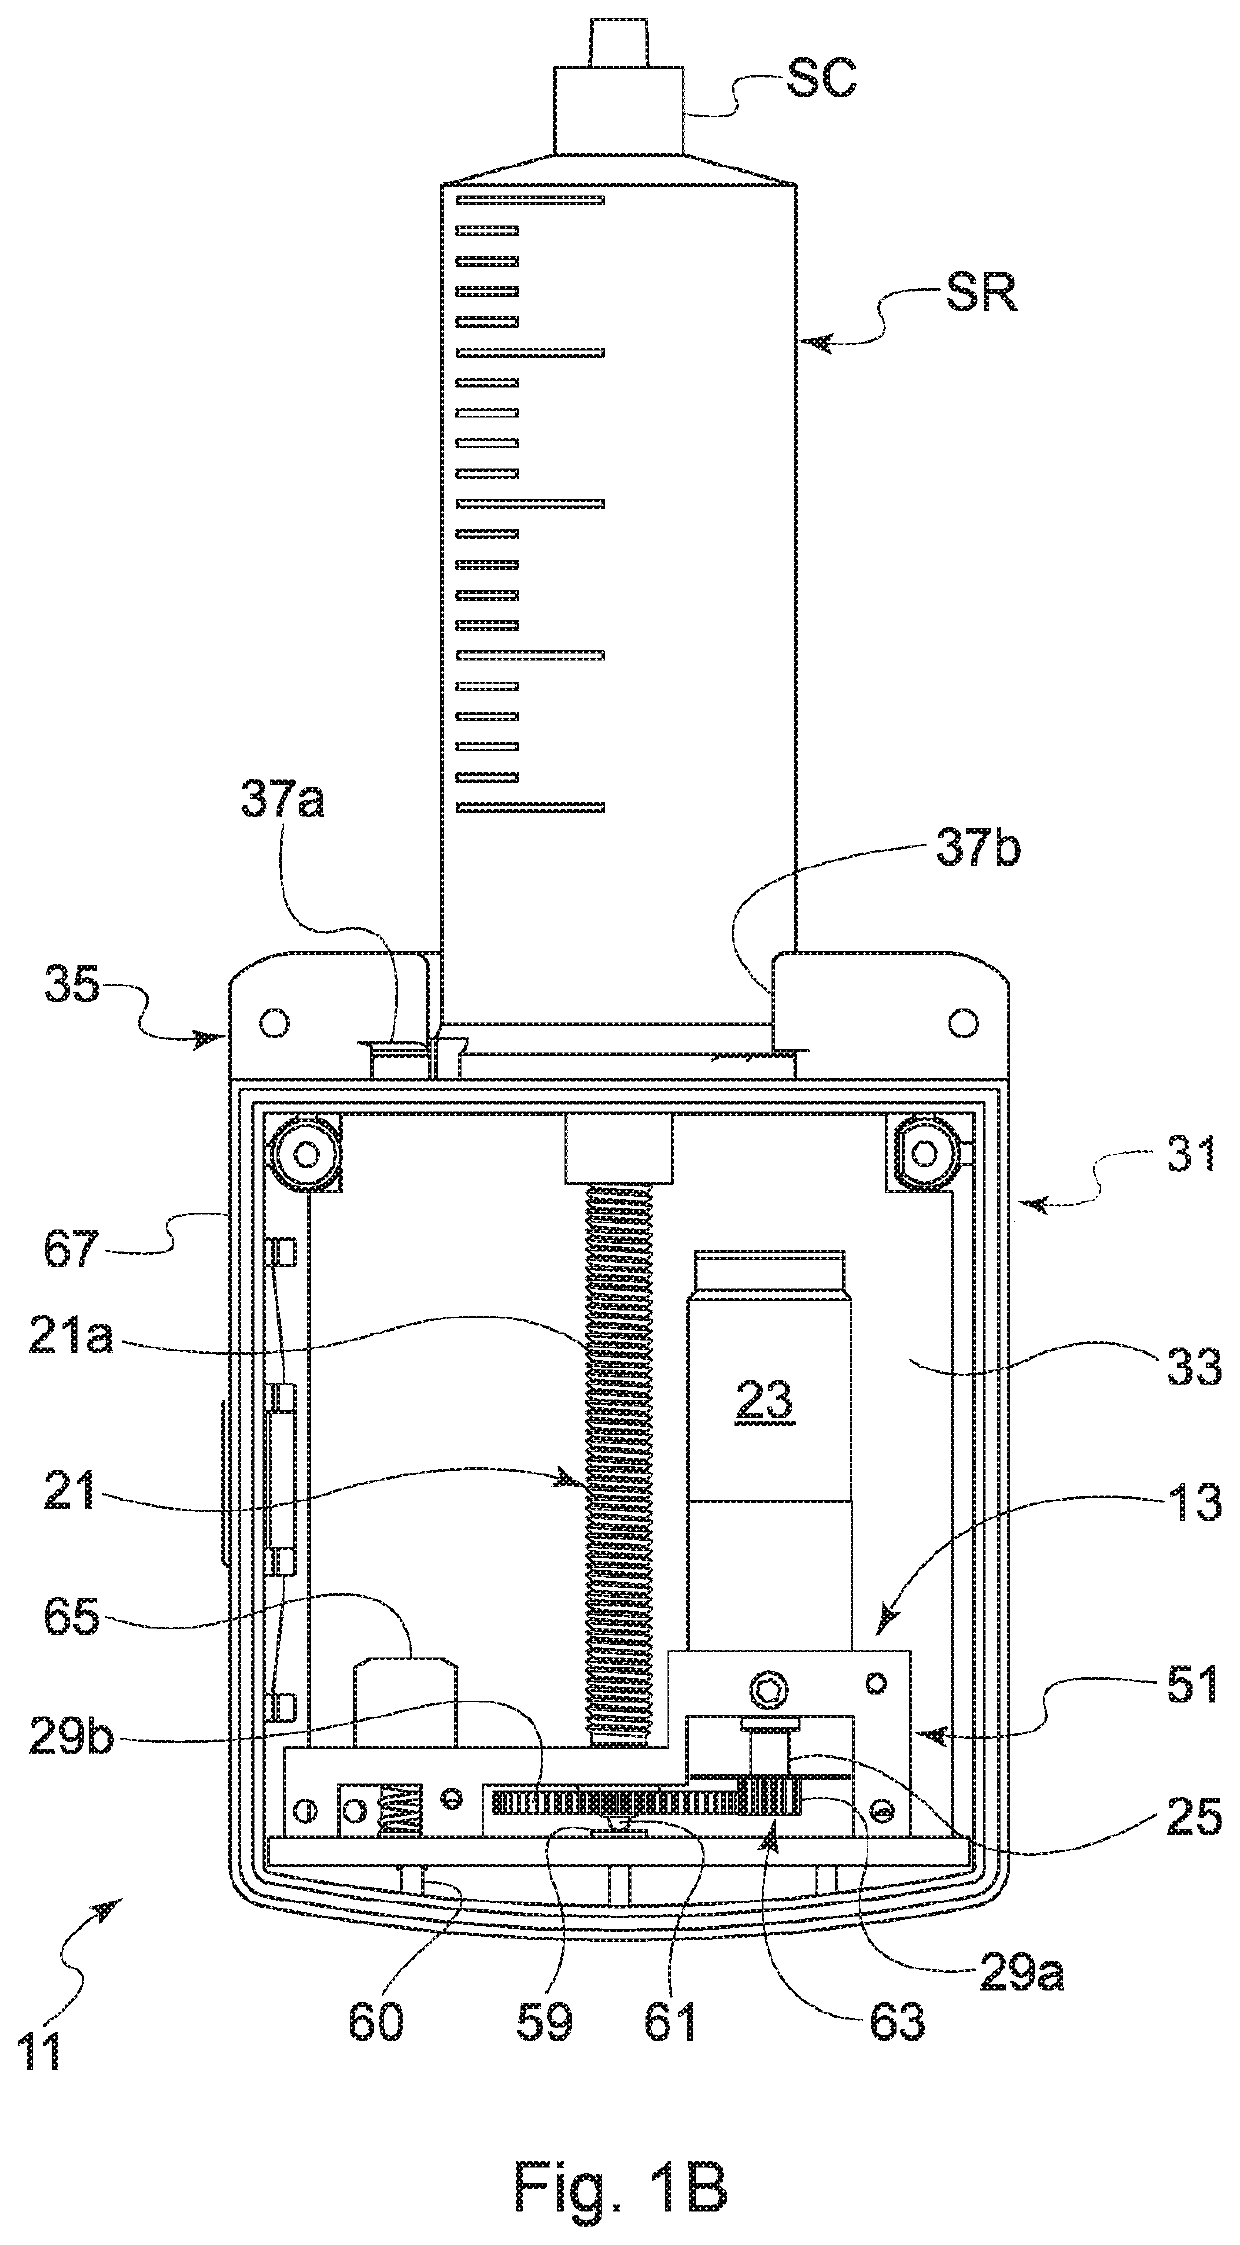 Portable pump for drug infusion through a syringe removably engaged in the pump